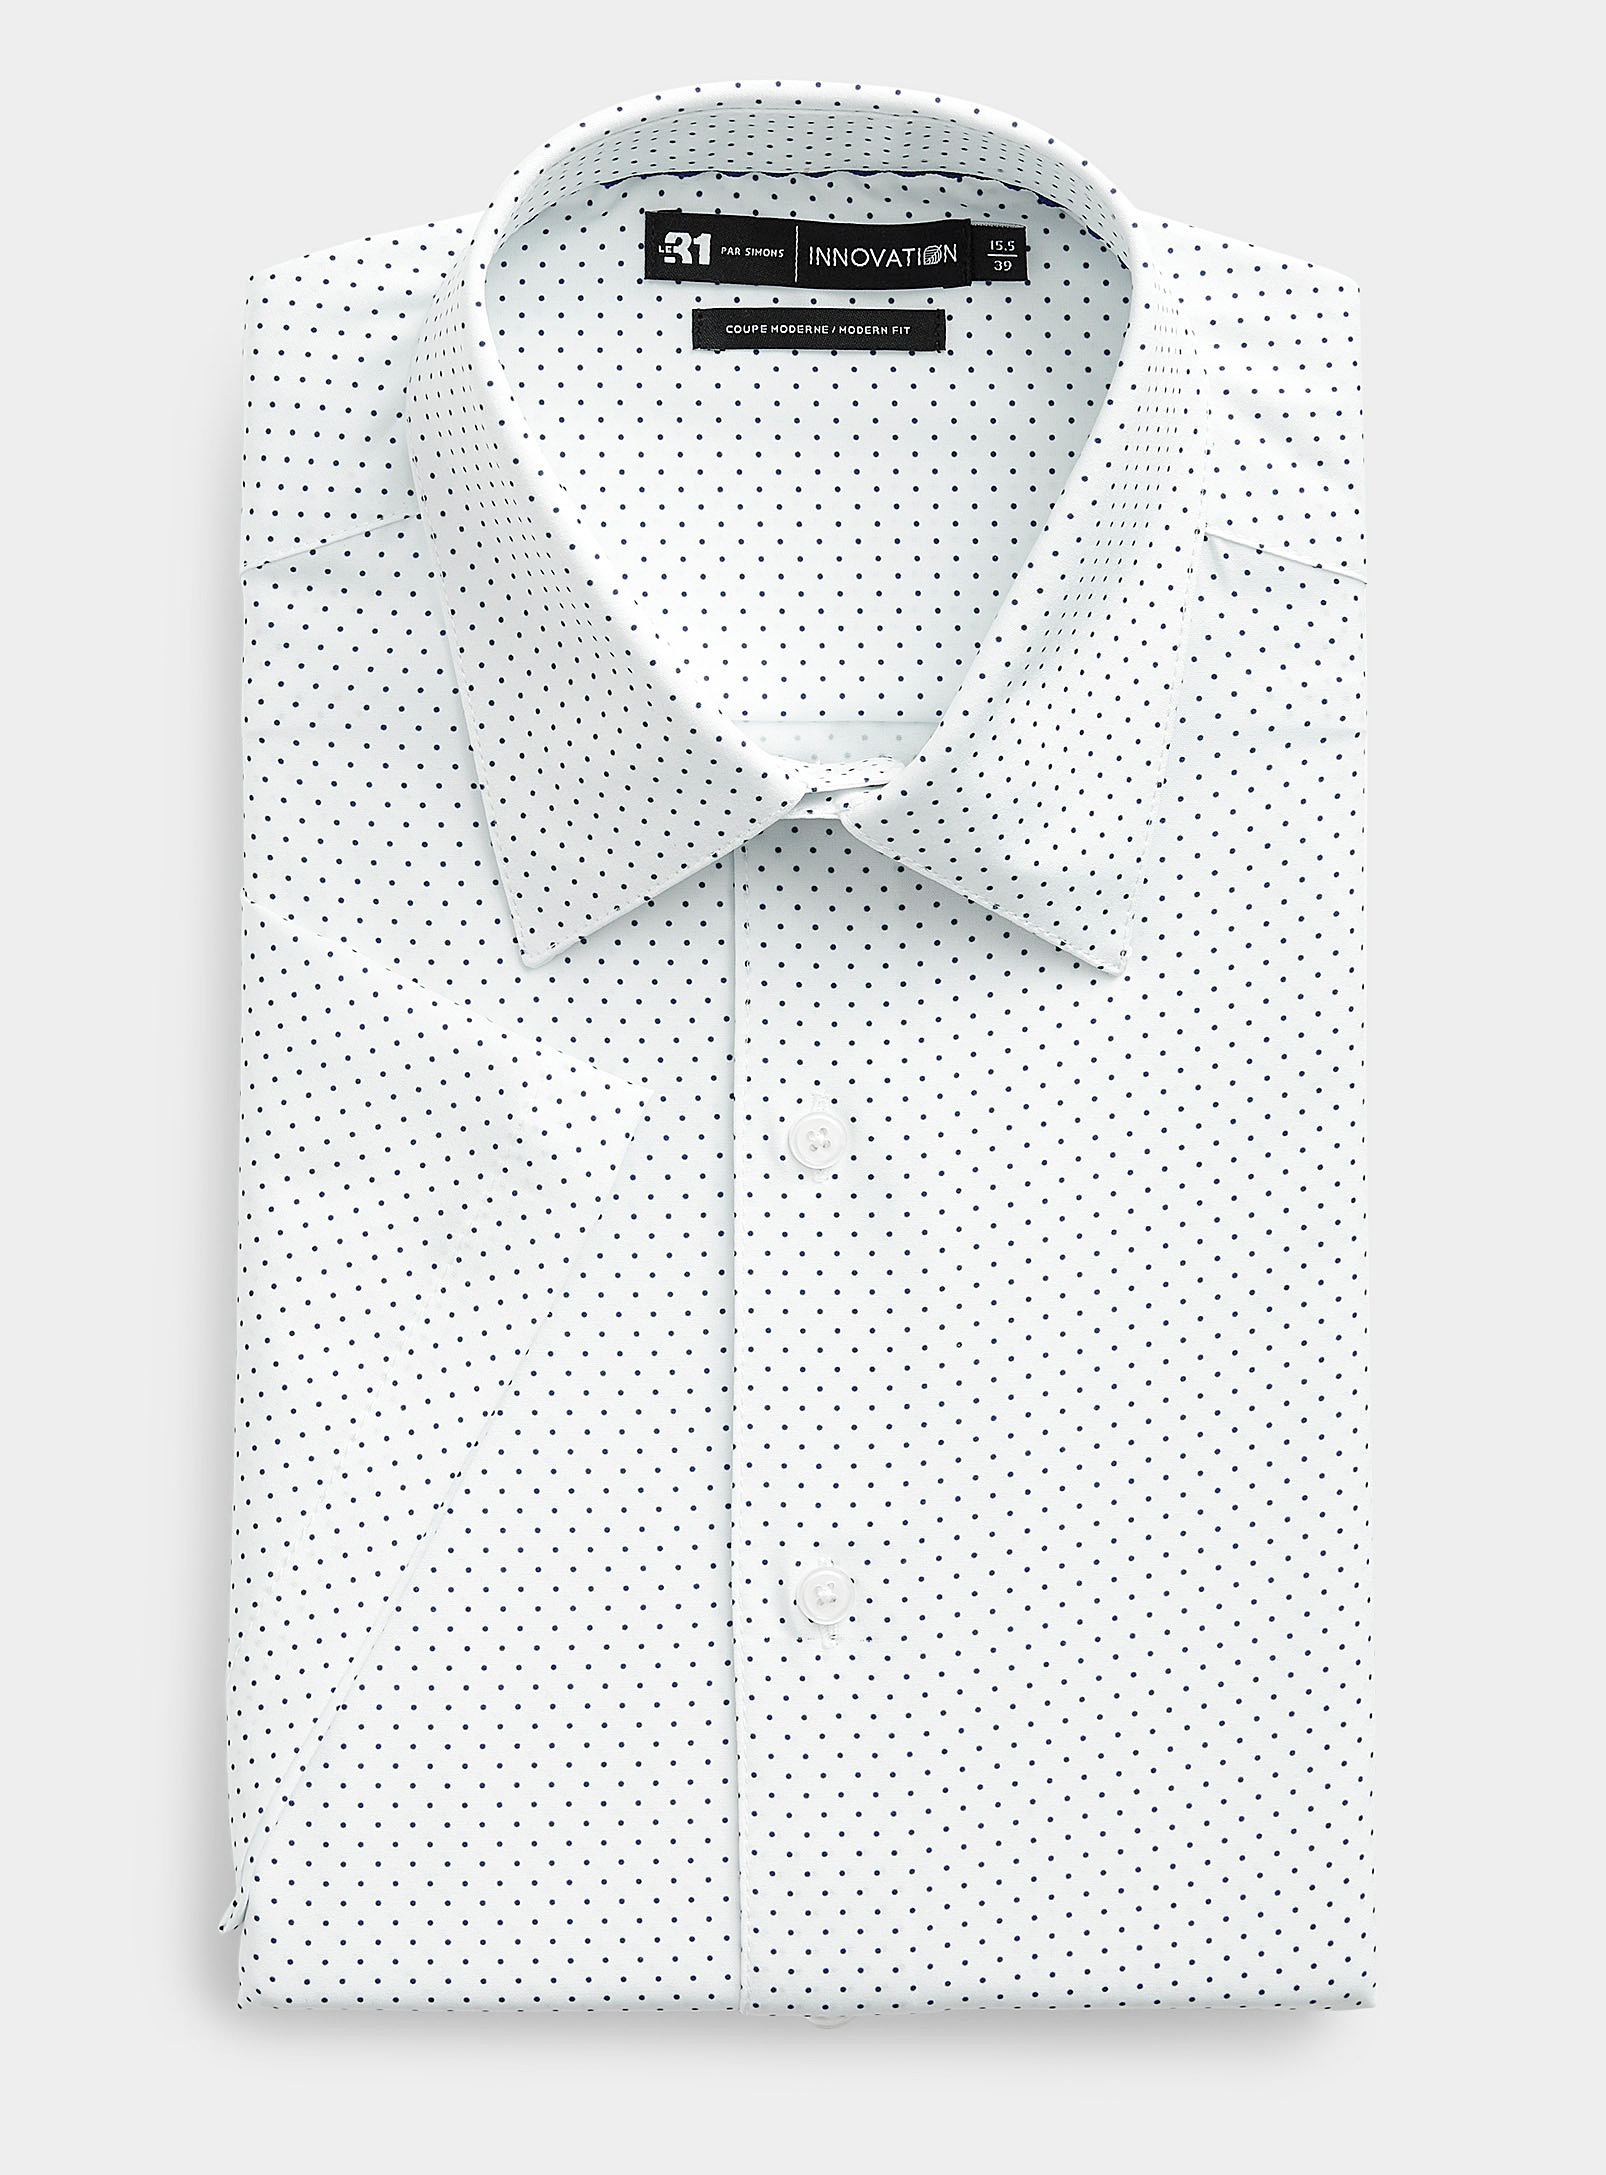 Le 31 Short-sleeve Fluid Dotwork Shirt Modern Fit Innovation Collection In Patterned White